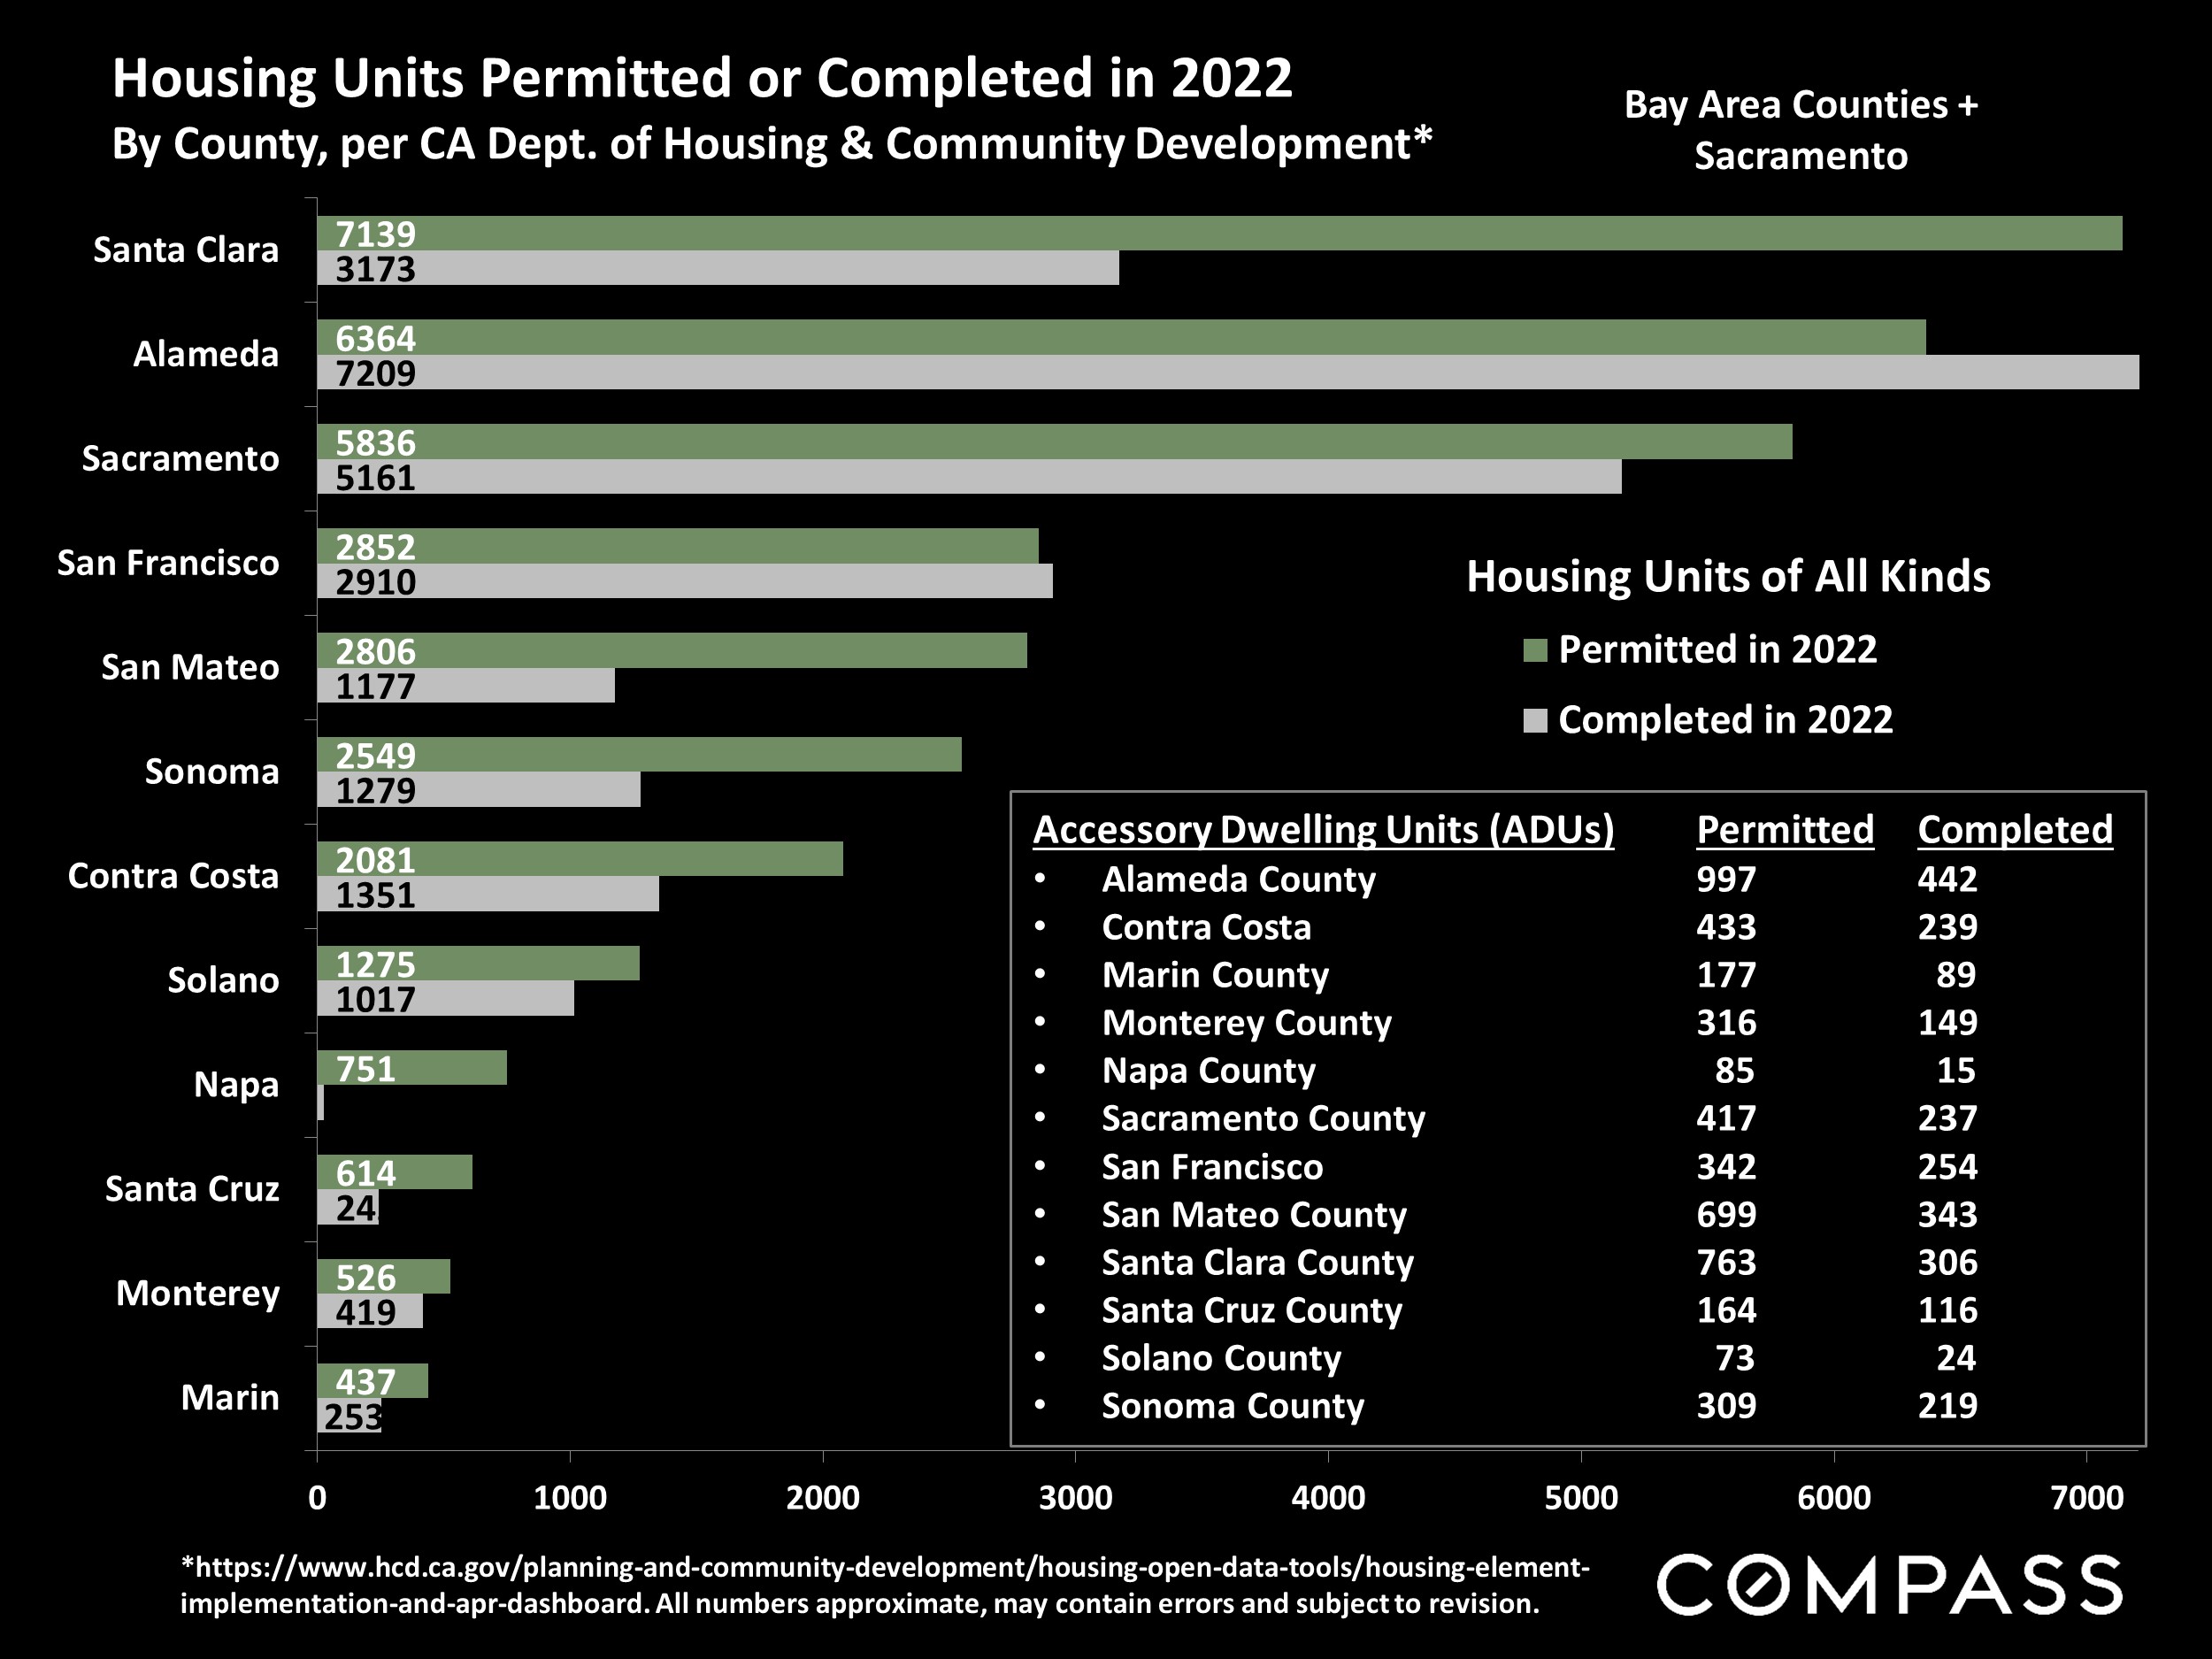 Housing Units Permitted or Completed in 2022